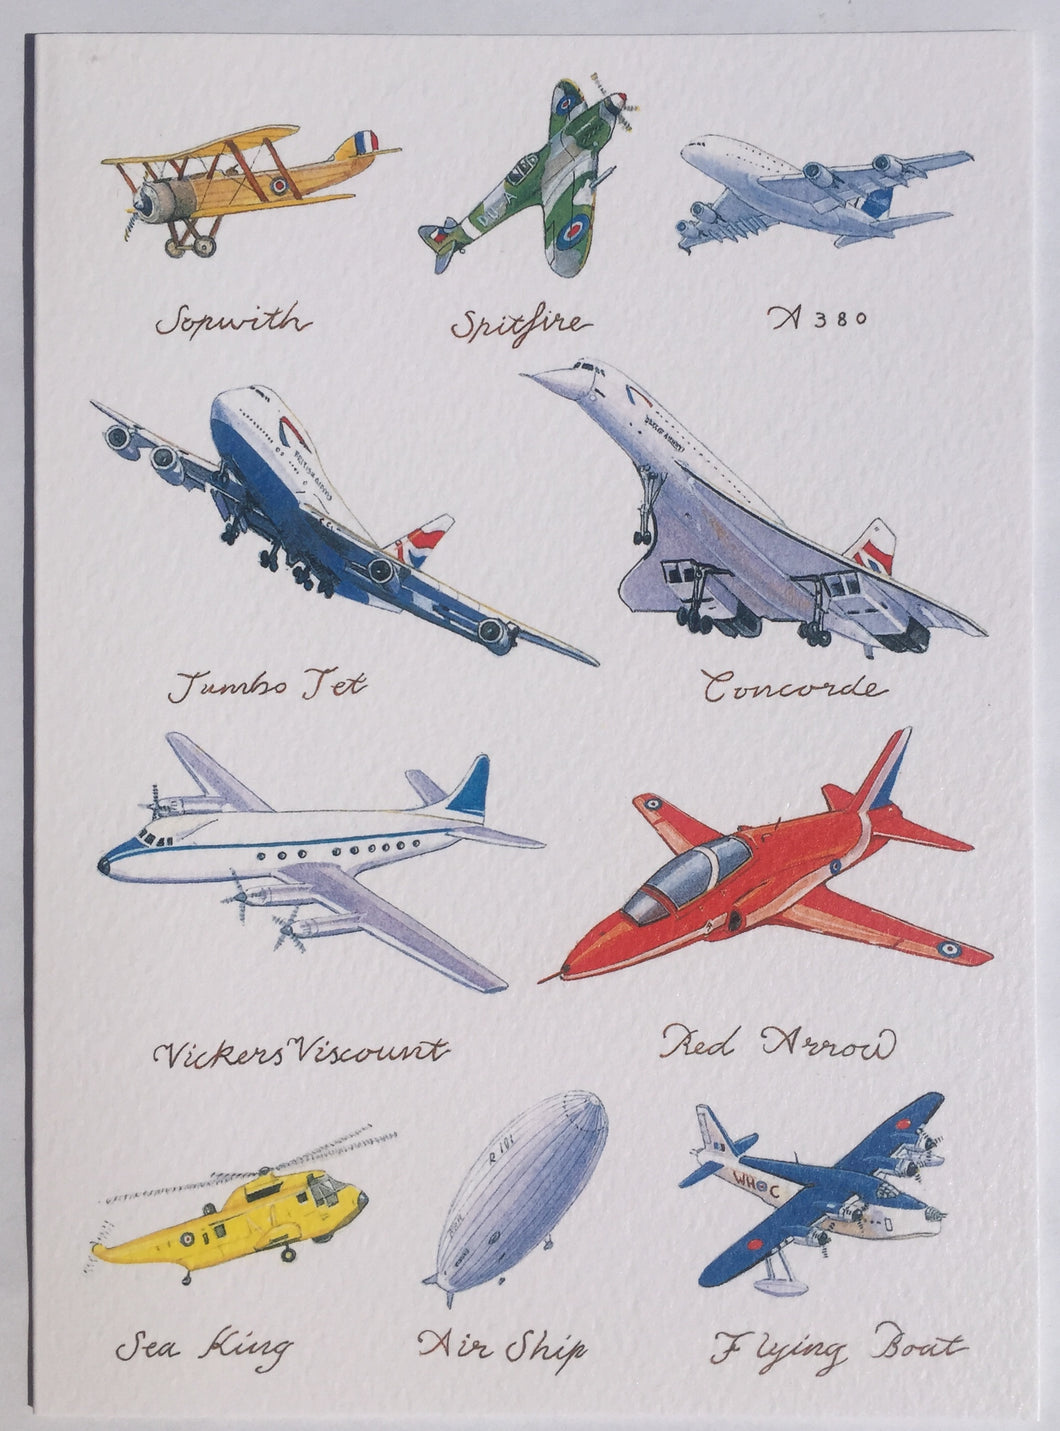 Classic Planes - The Alresford Gift Shop